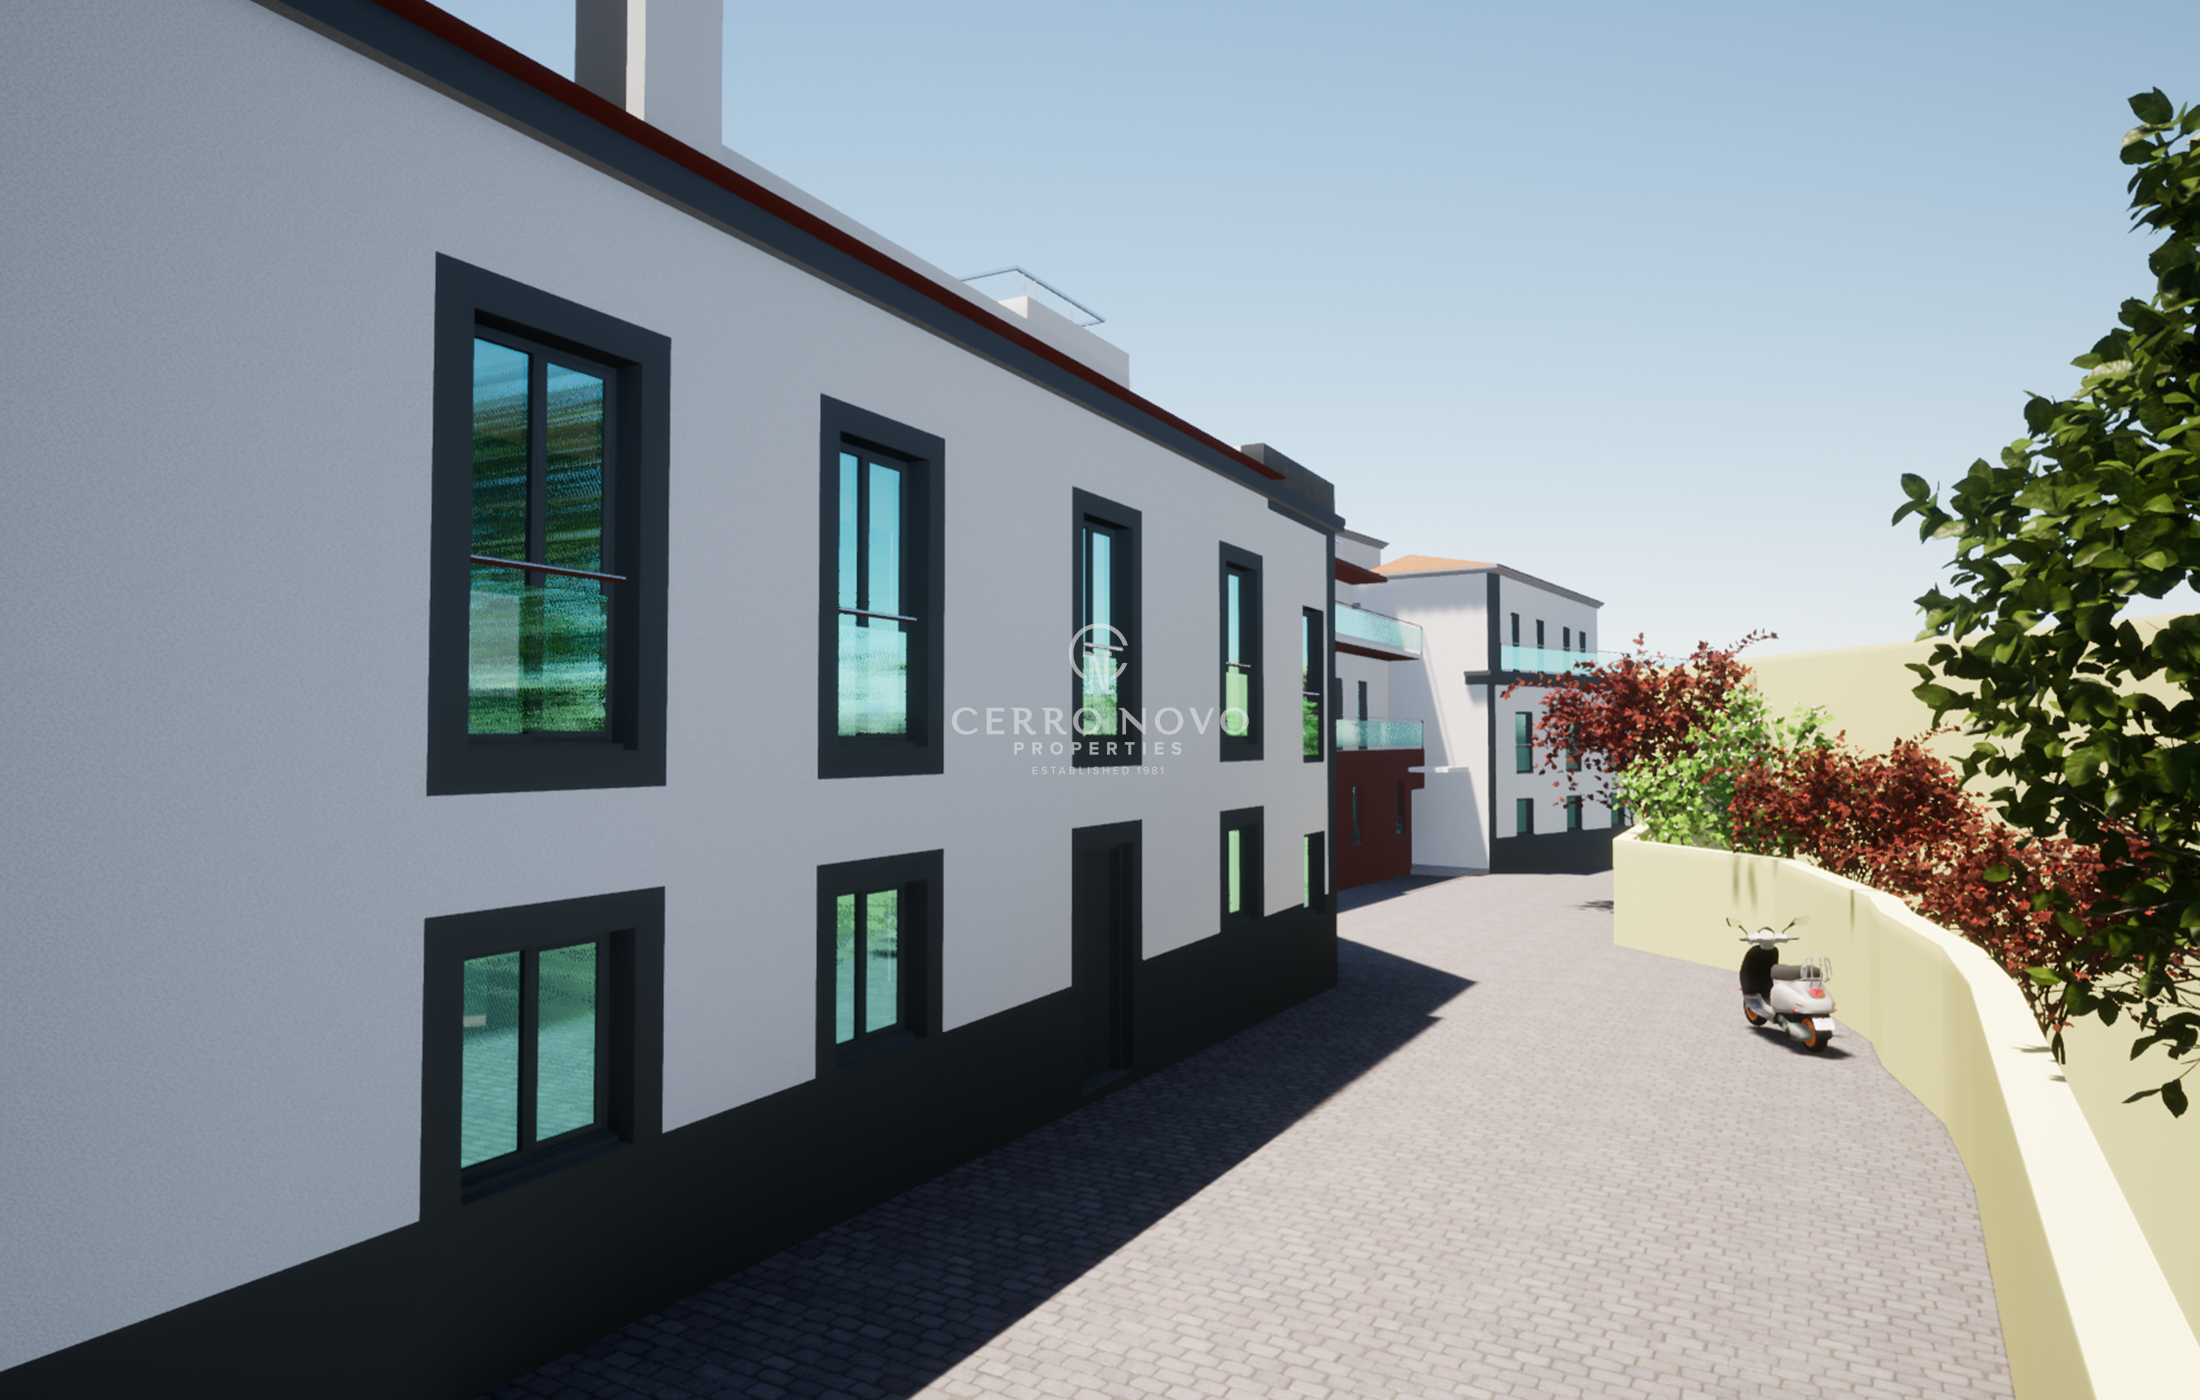 New under construction T1+1 apartments situated in a convenient location